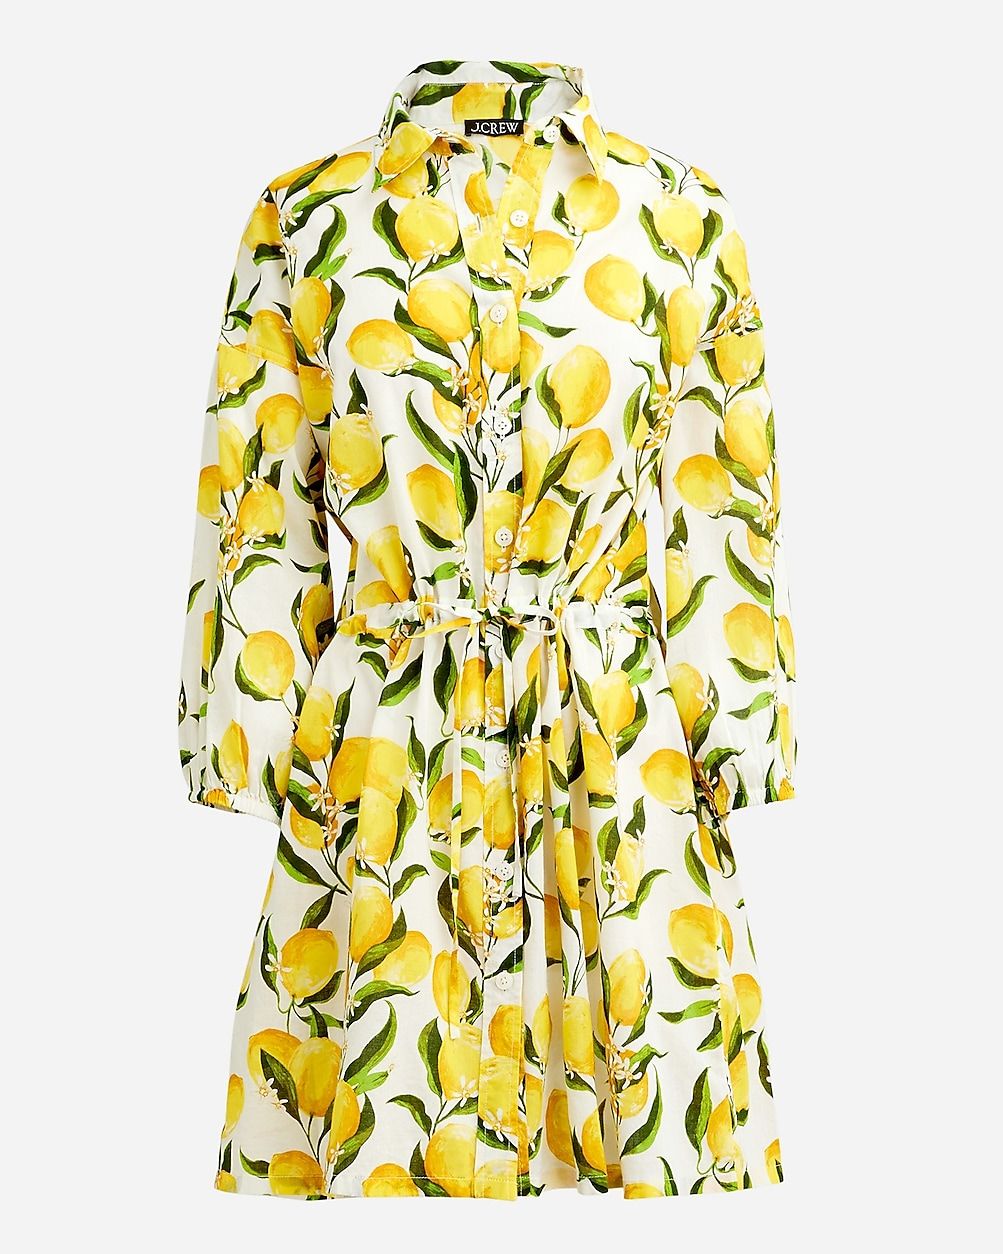 Cinched shirtdress in limoncello | J.Crew US